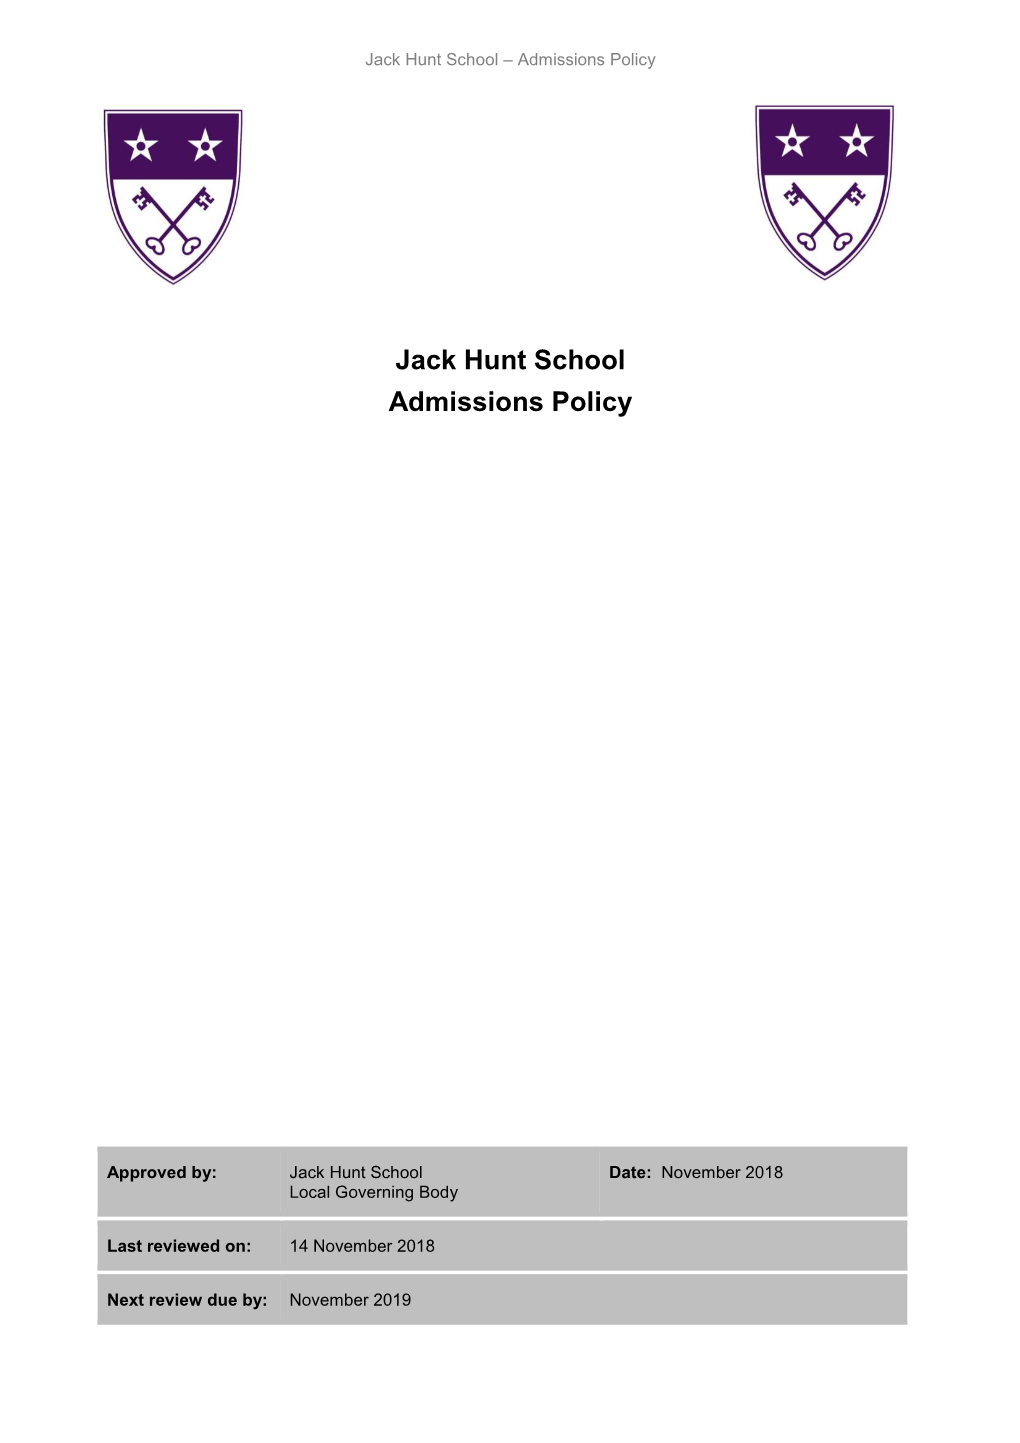 Jack Hunt School Admissions Policy